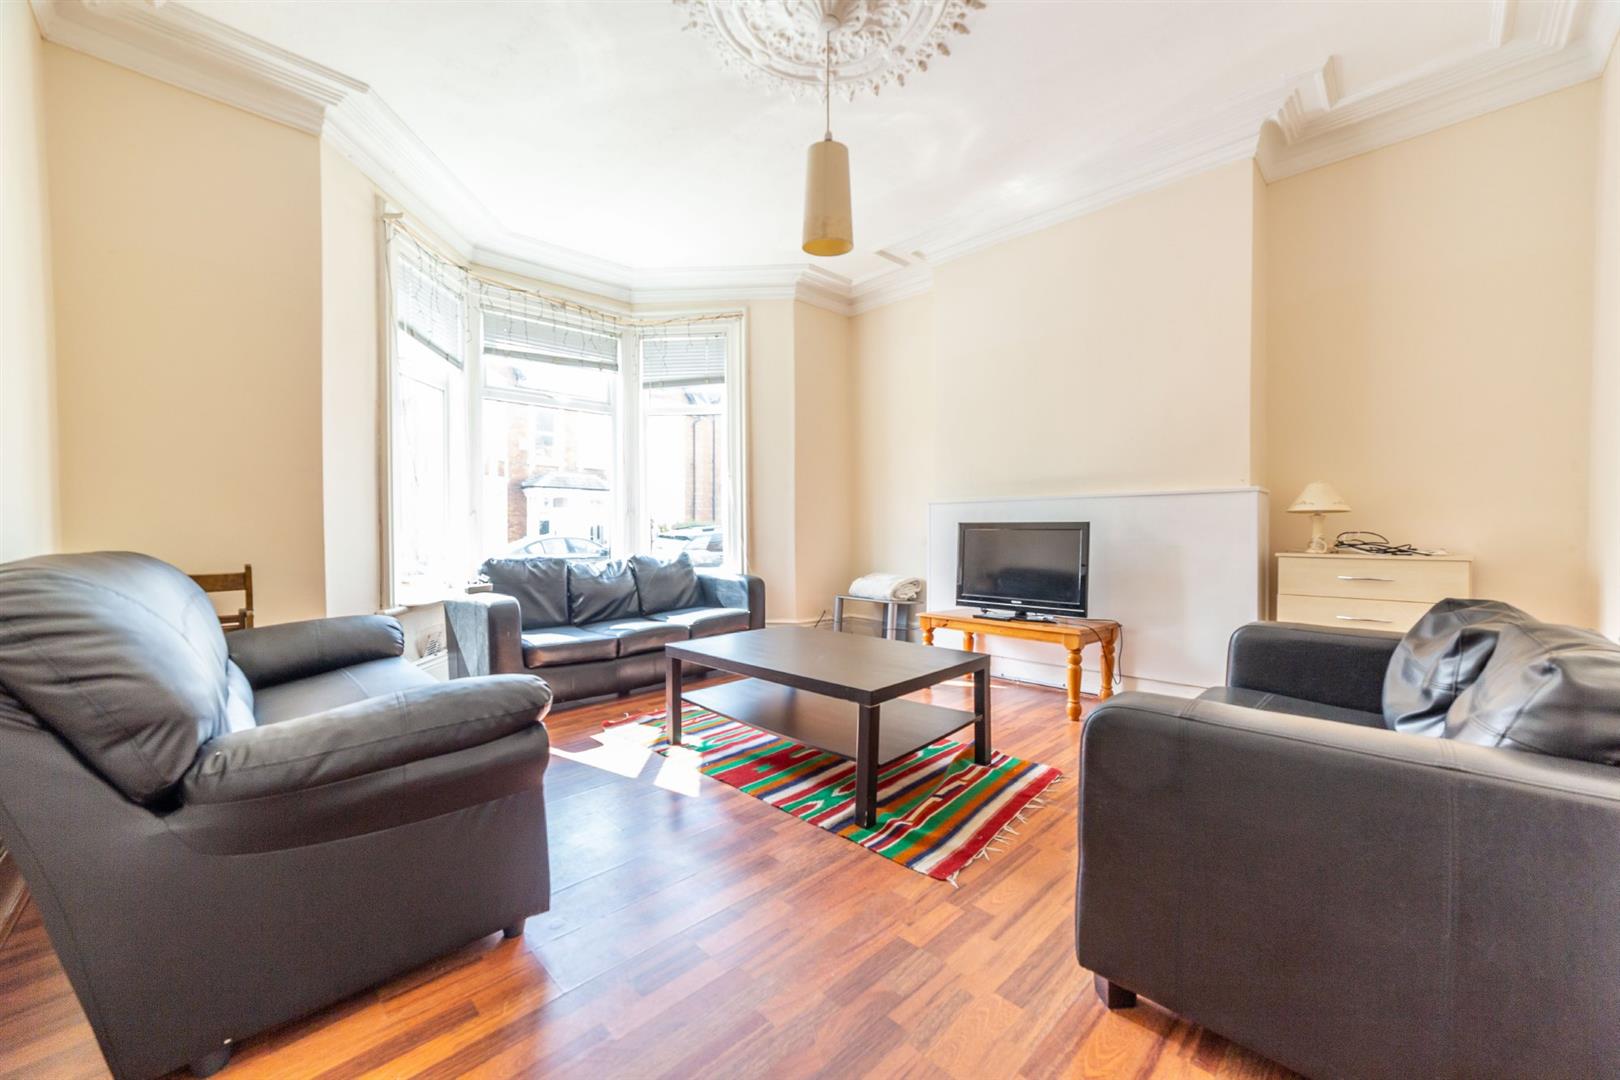 5 bed terraced house to rent in Simonside Terrace, Newcastle Upon Tyne - Property Image 1